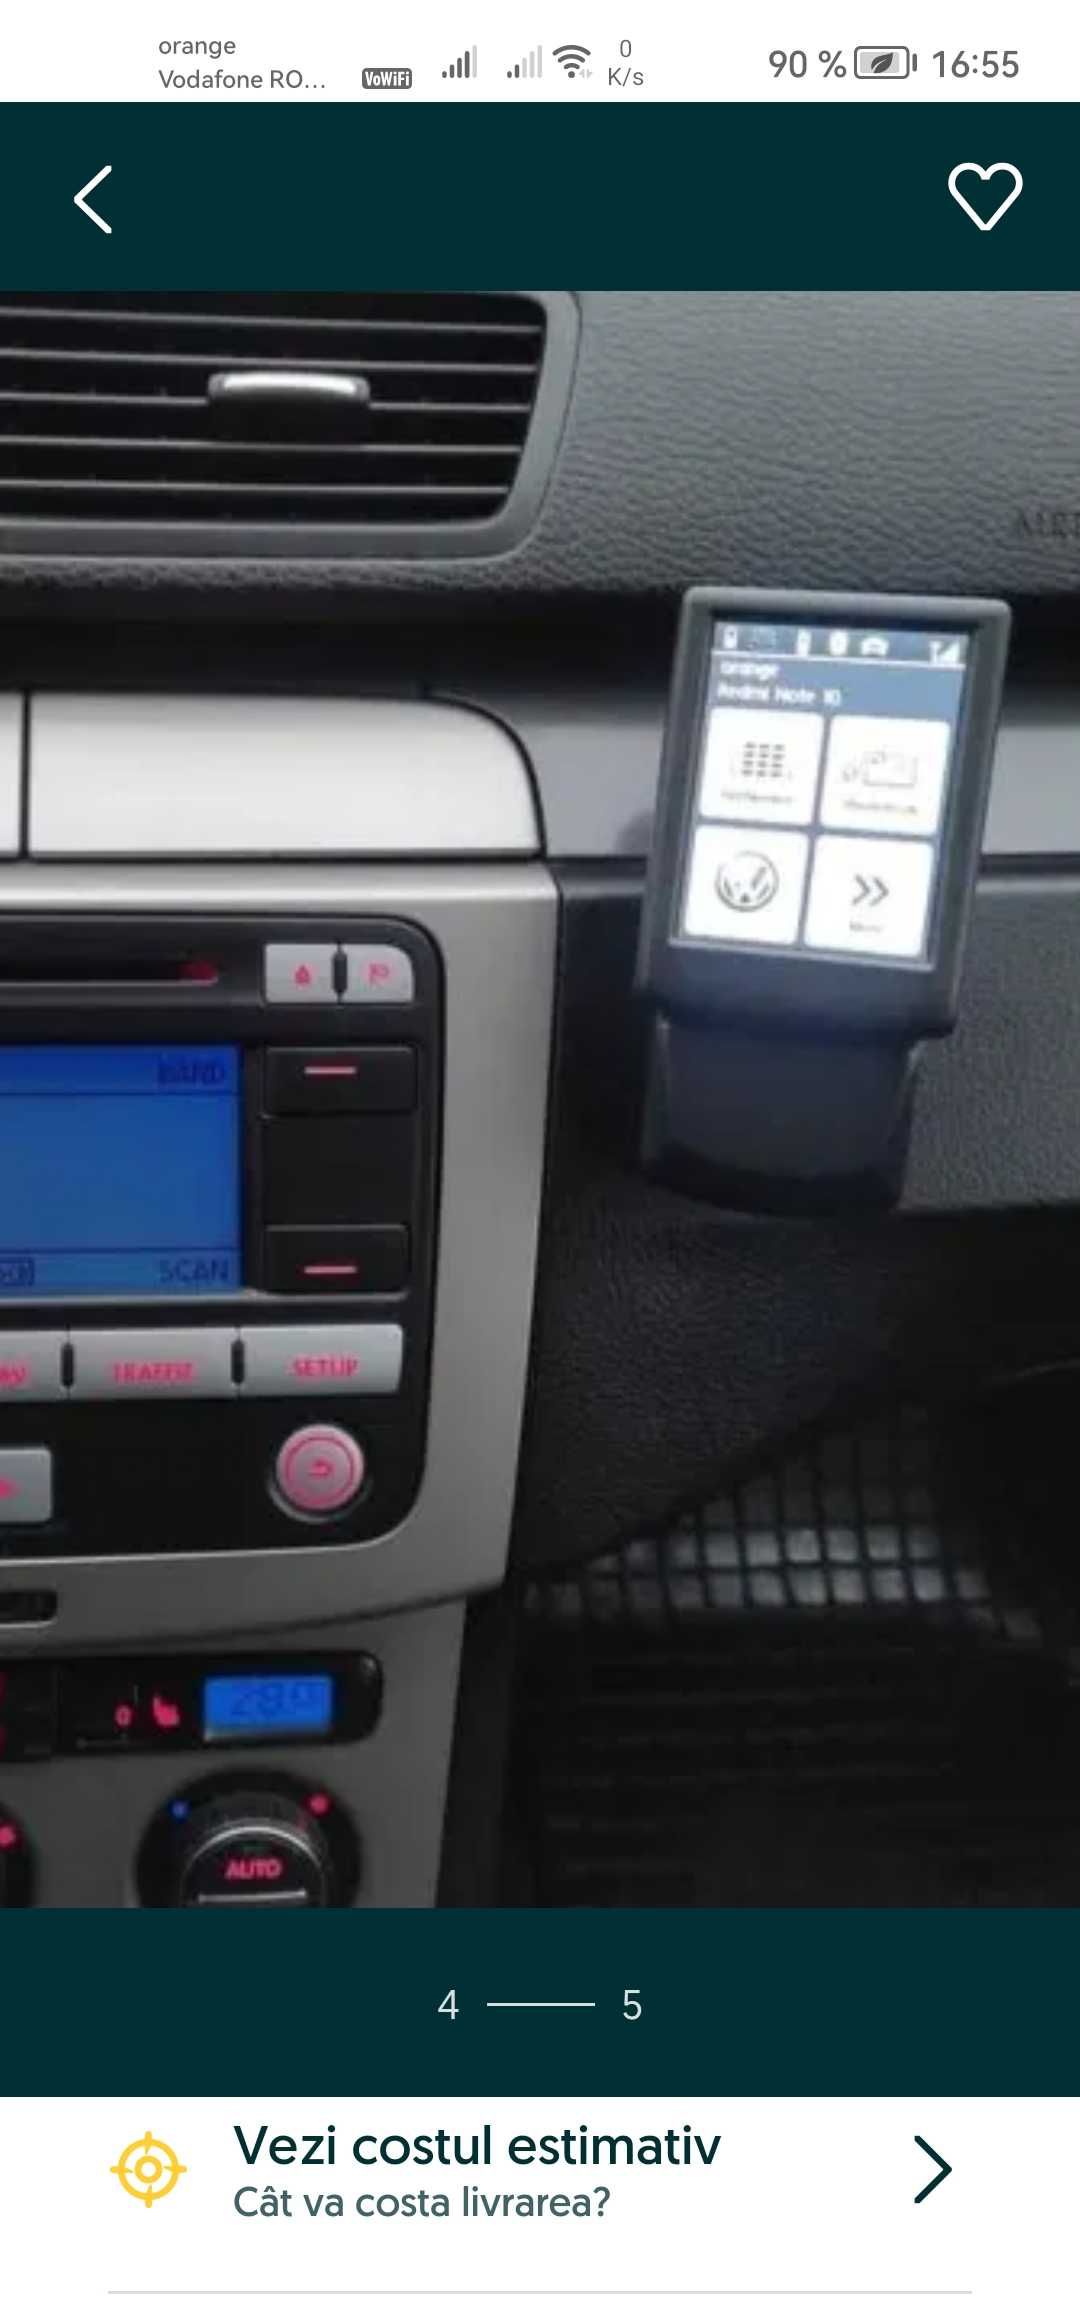 Toll curve The office Touch phone digital, display LCD bluetooth, Audi, VW Suceava • OLX.ro